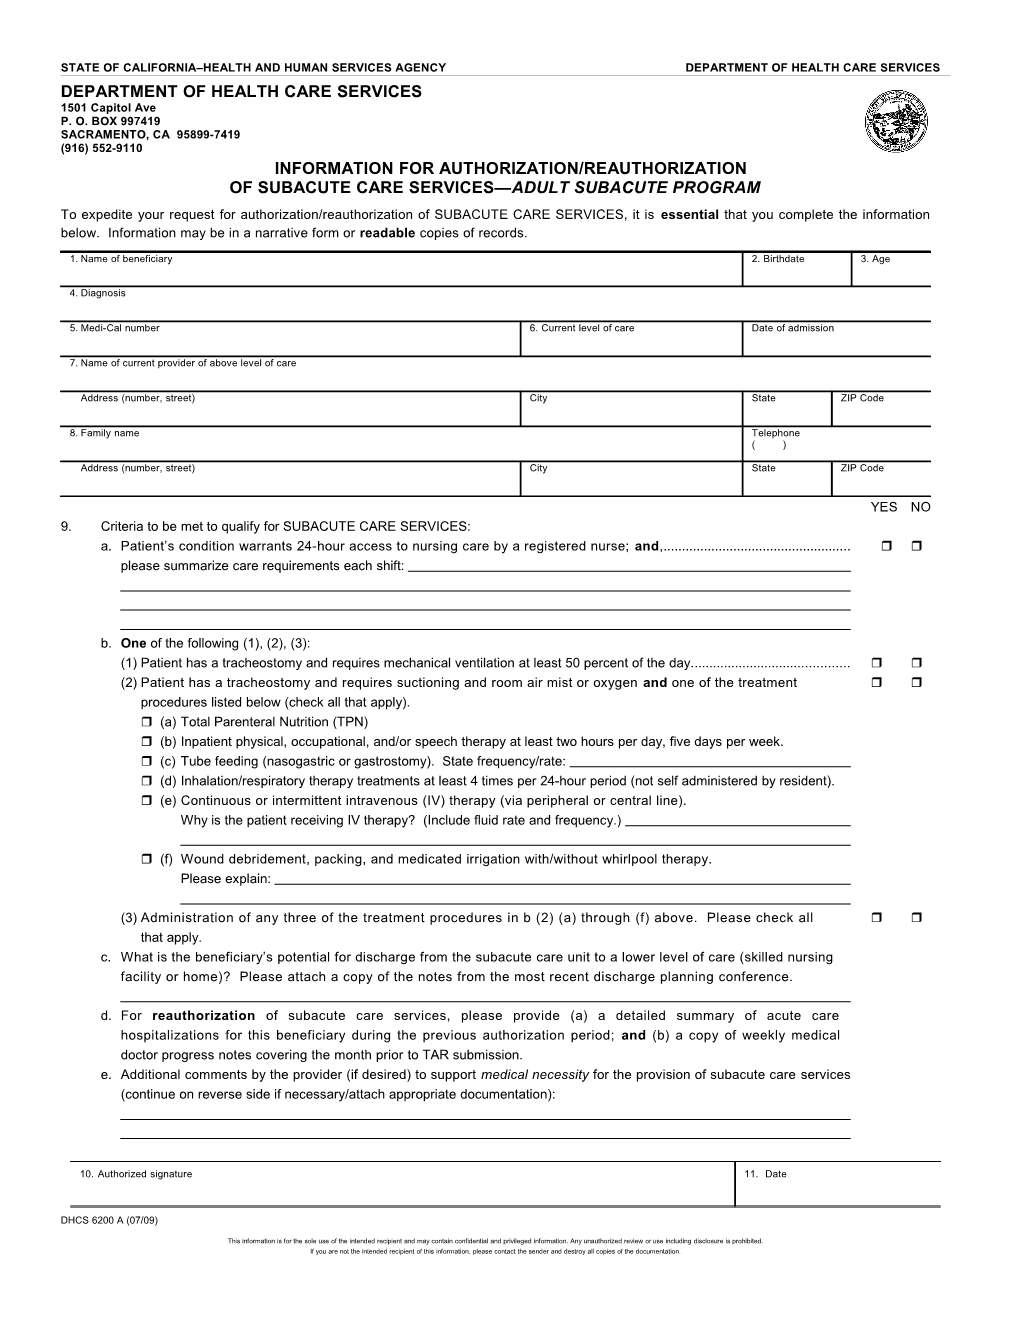 Form: Information for Authorization/Reauthorization of Subacute Care Services Adult Subacute